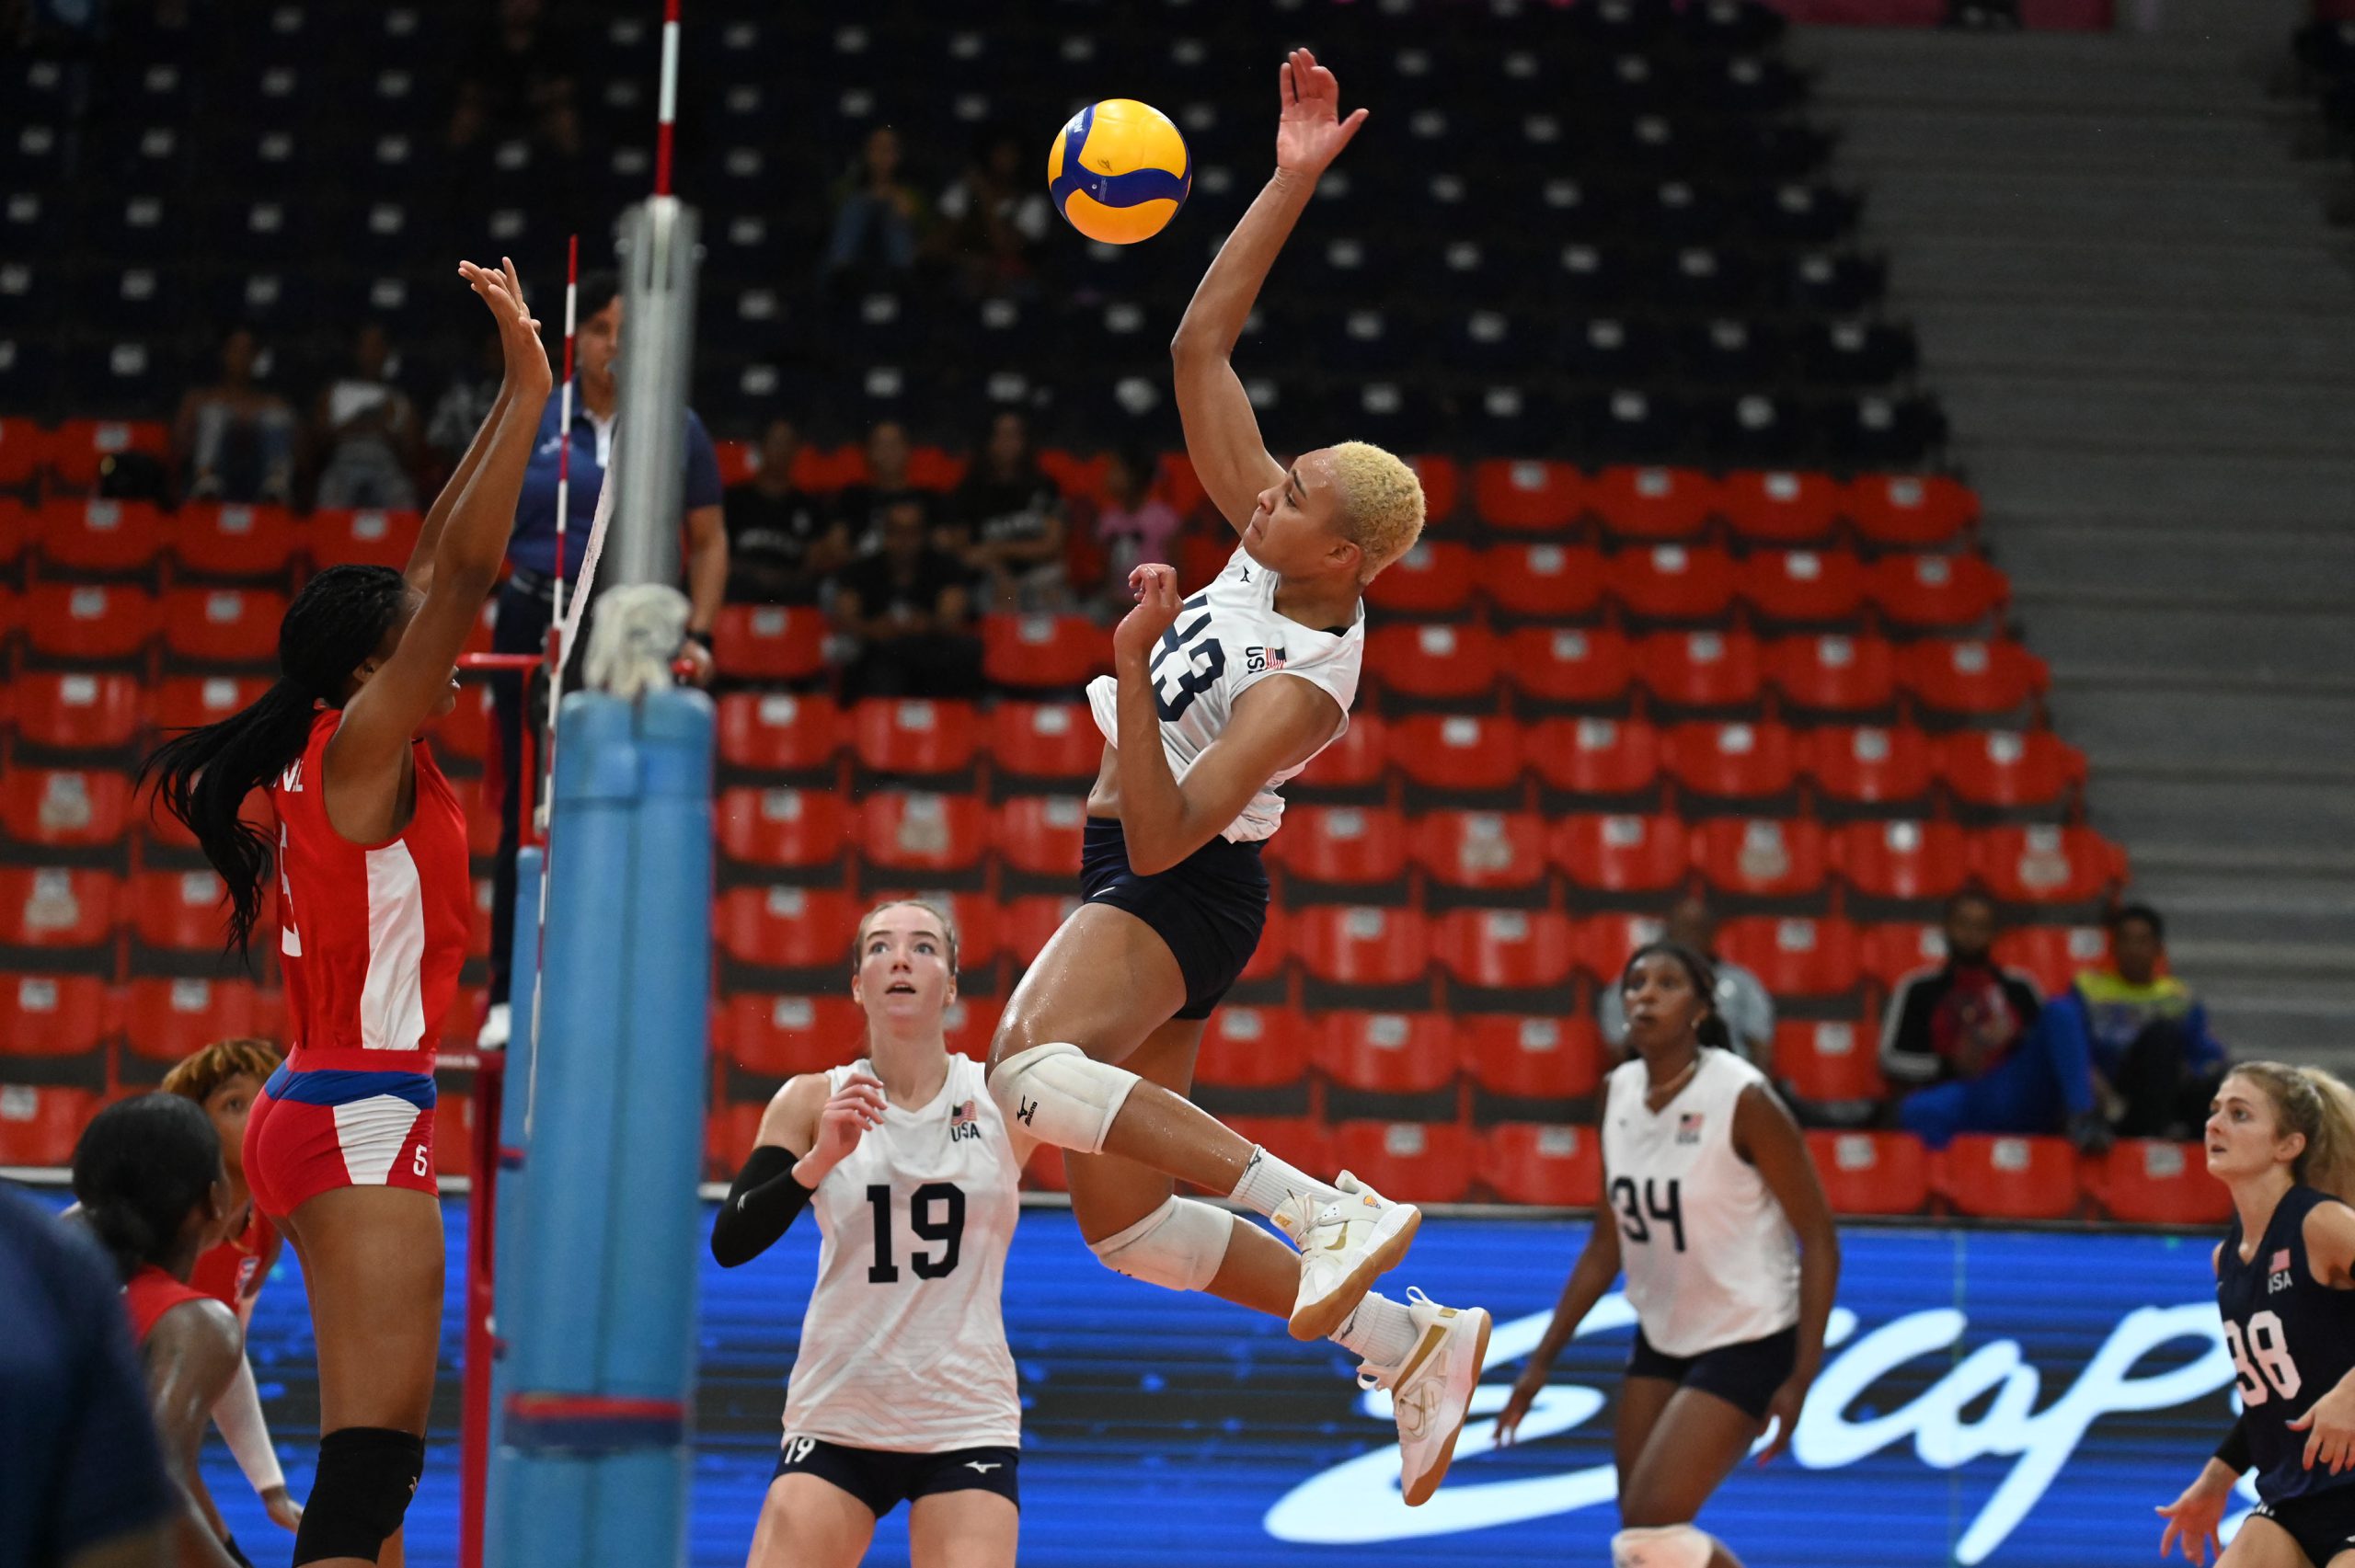 USA remains undefeated in Final Six